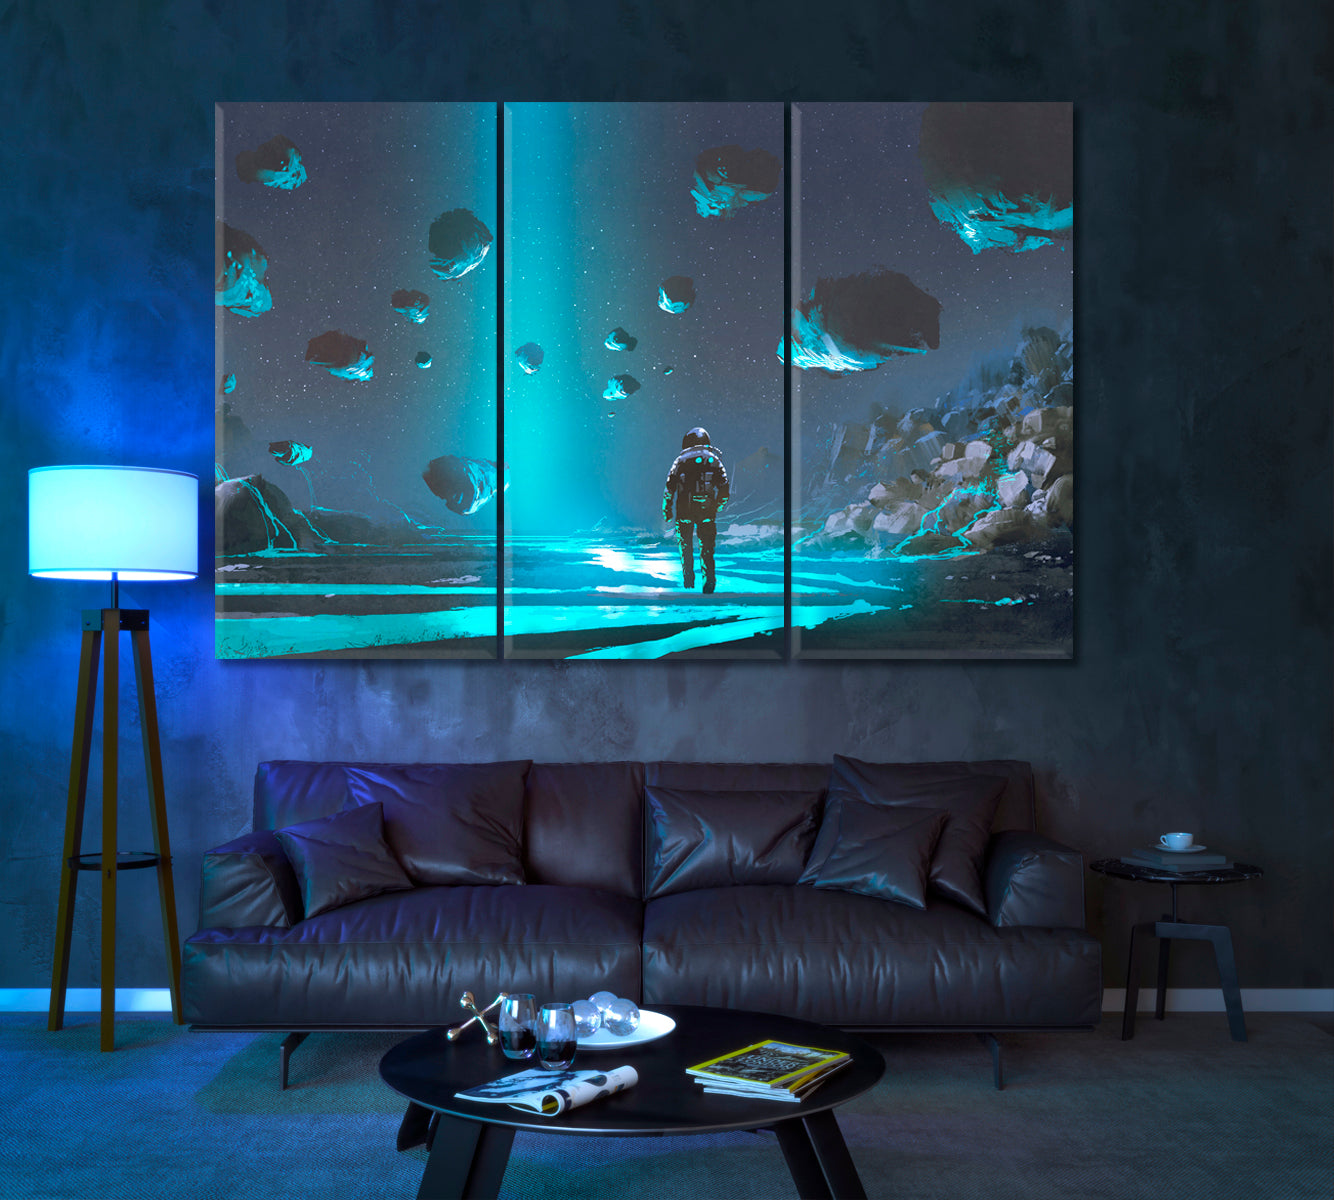 Astronaut on Alien Planet with Glowing Meteorites Canvas Print ArtLexy 3 Panels 36"x24" inches 